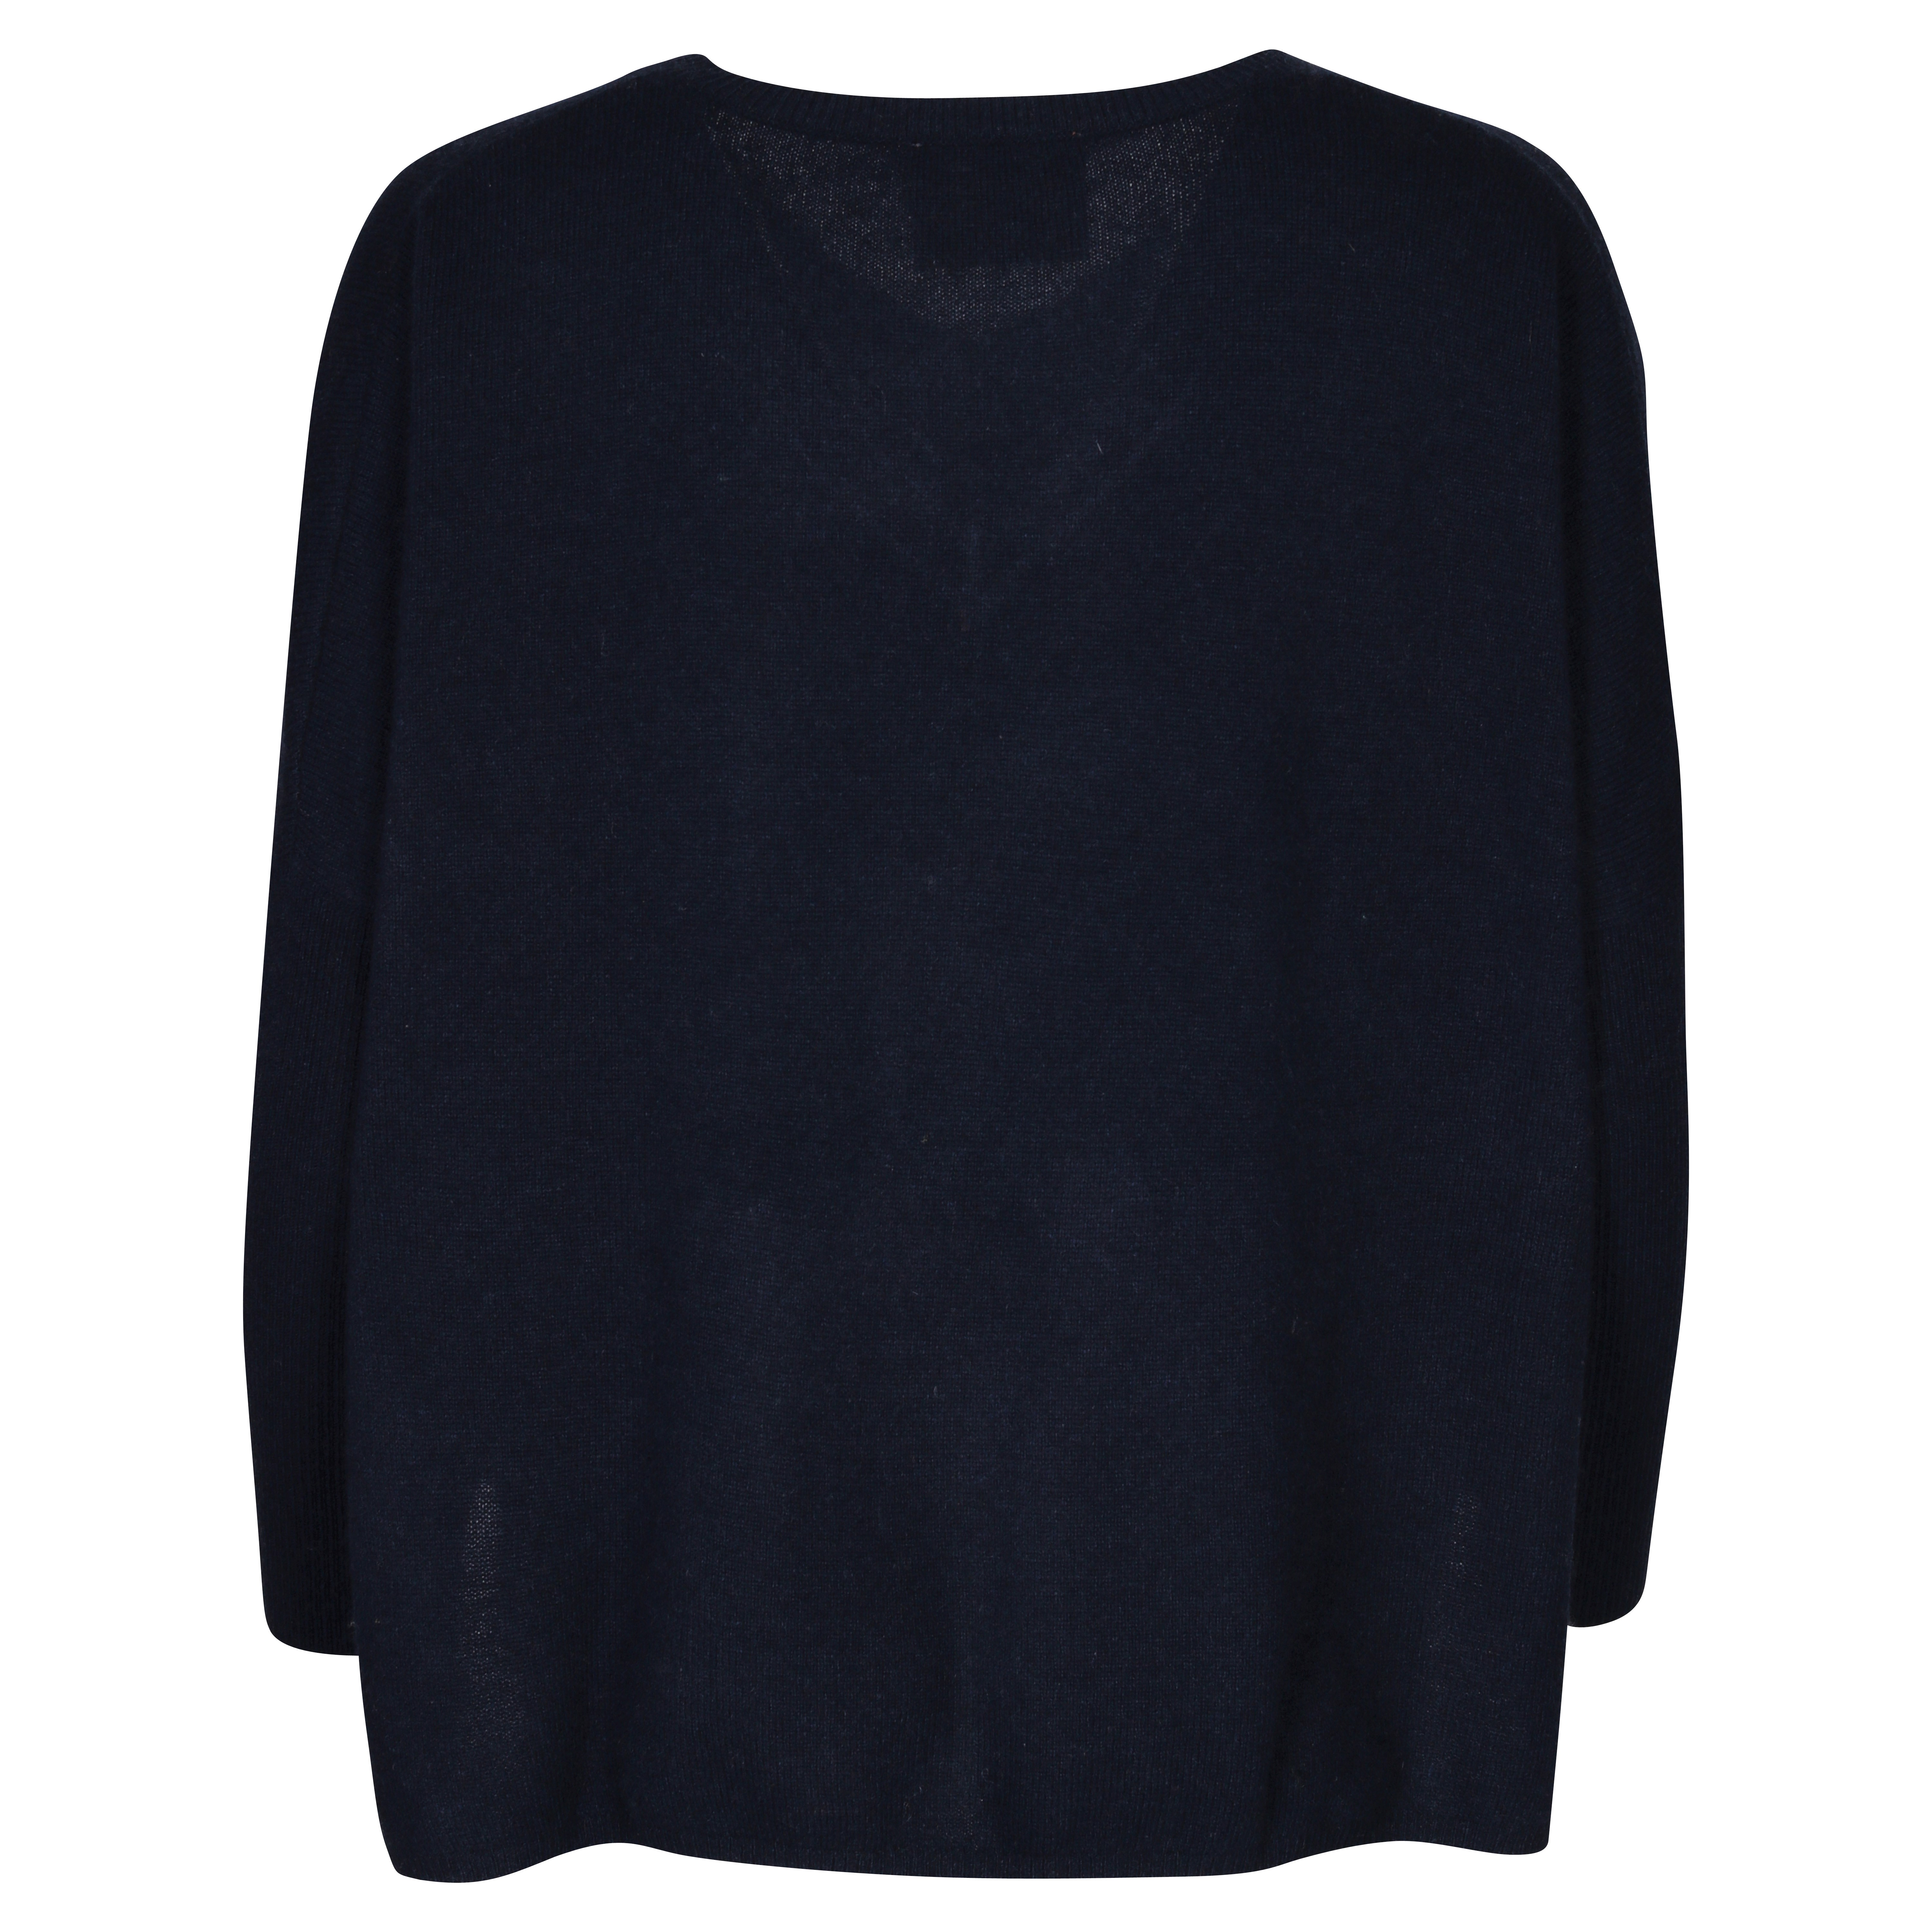 Absolut Cashmere Poncho Sweater in Navy L